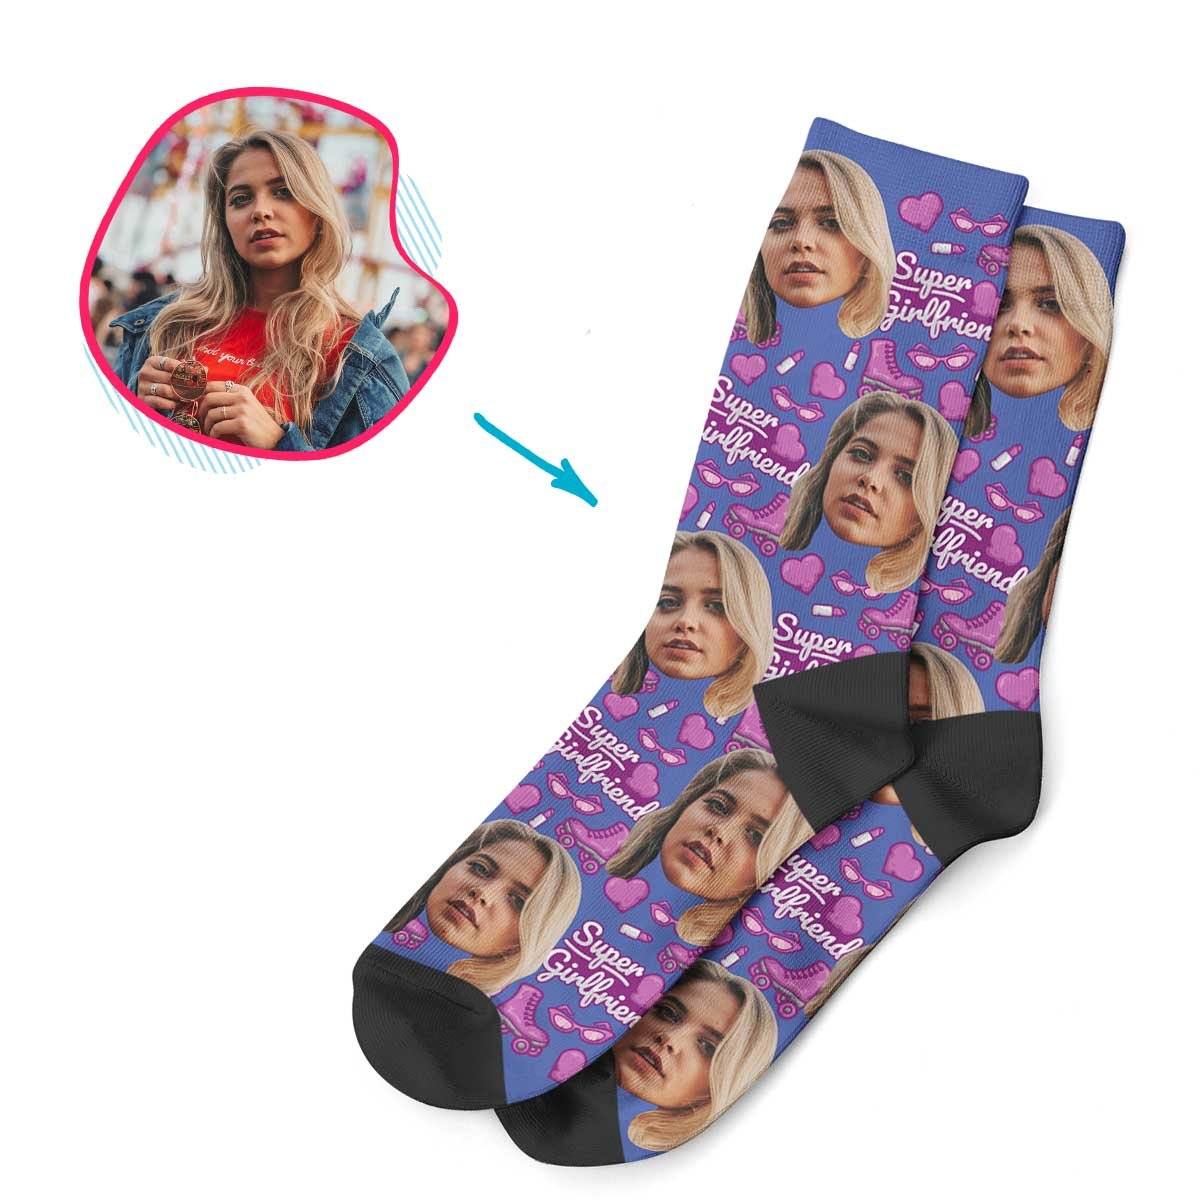 Darkblue Girlfriend personalized socks with photo of face printed on them